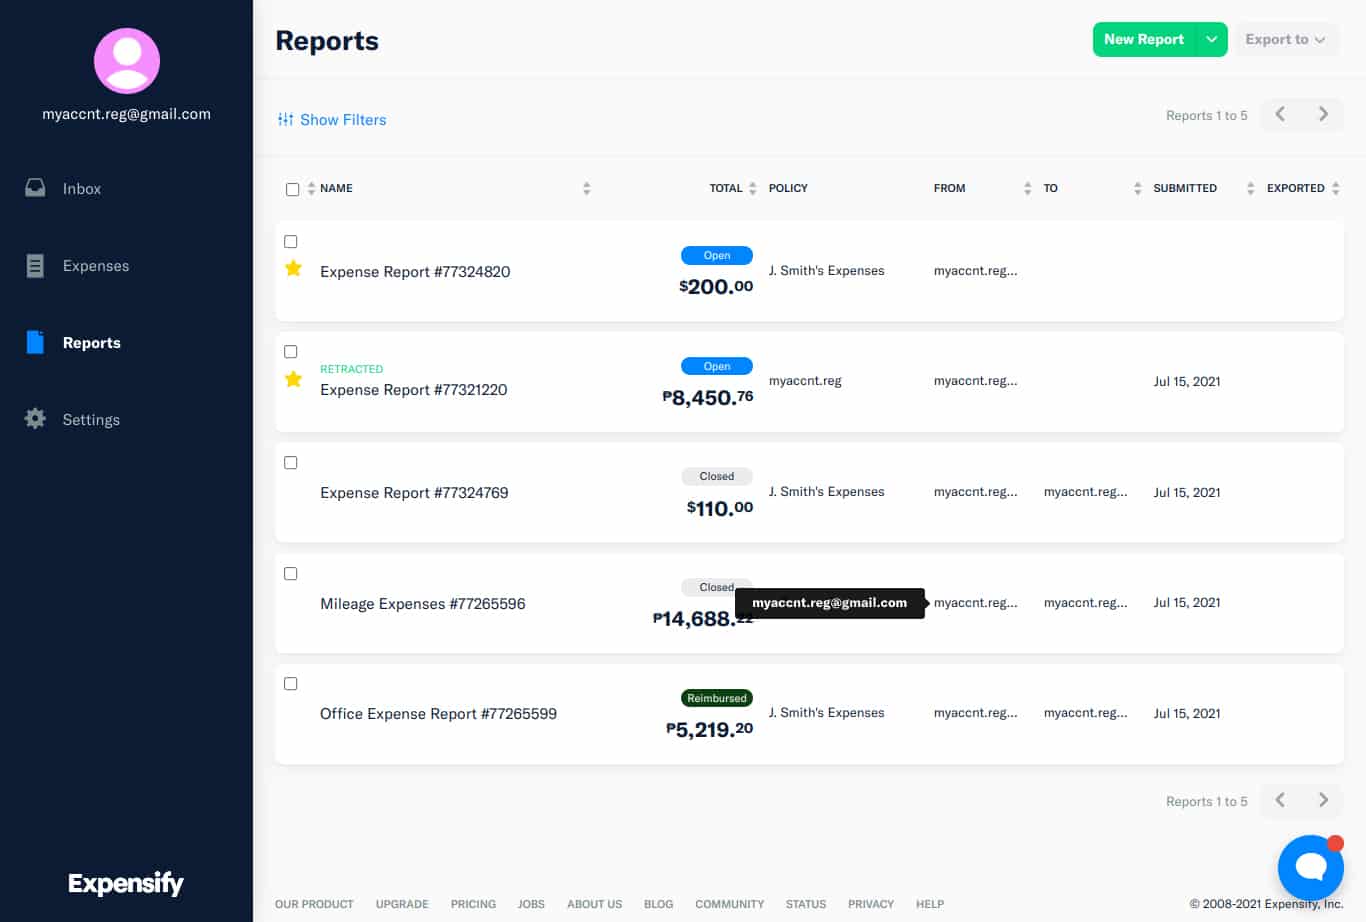 A screenshot of the Expensify report screen.